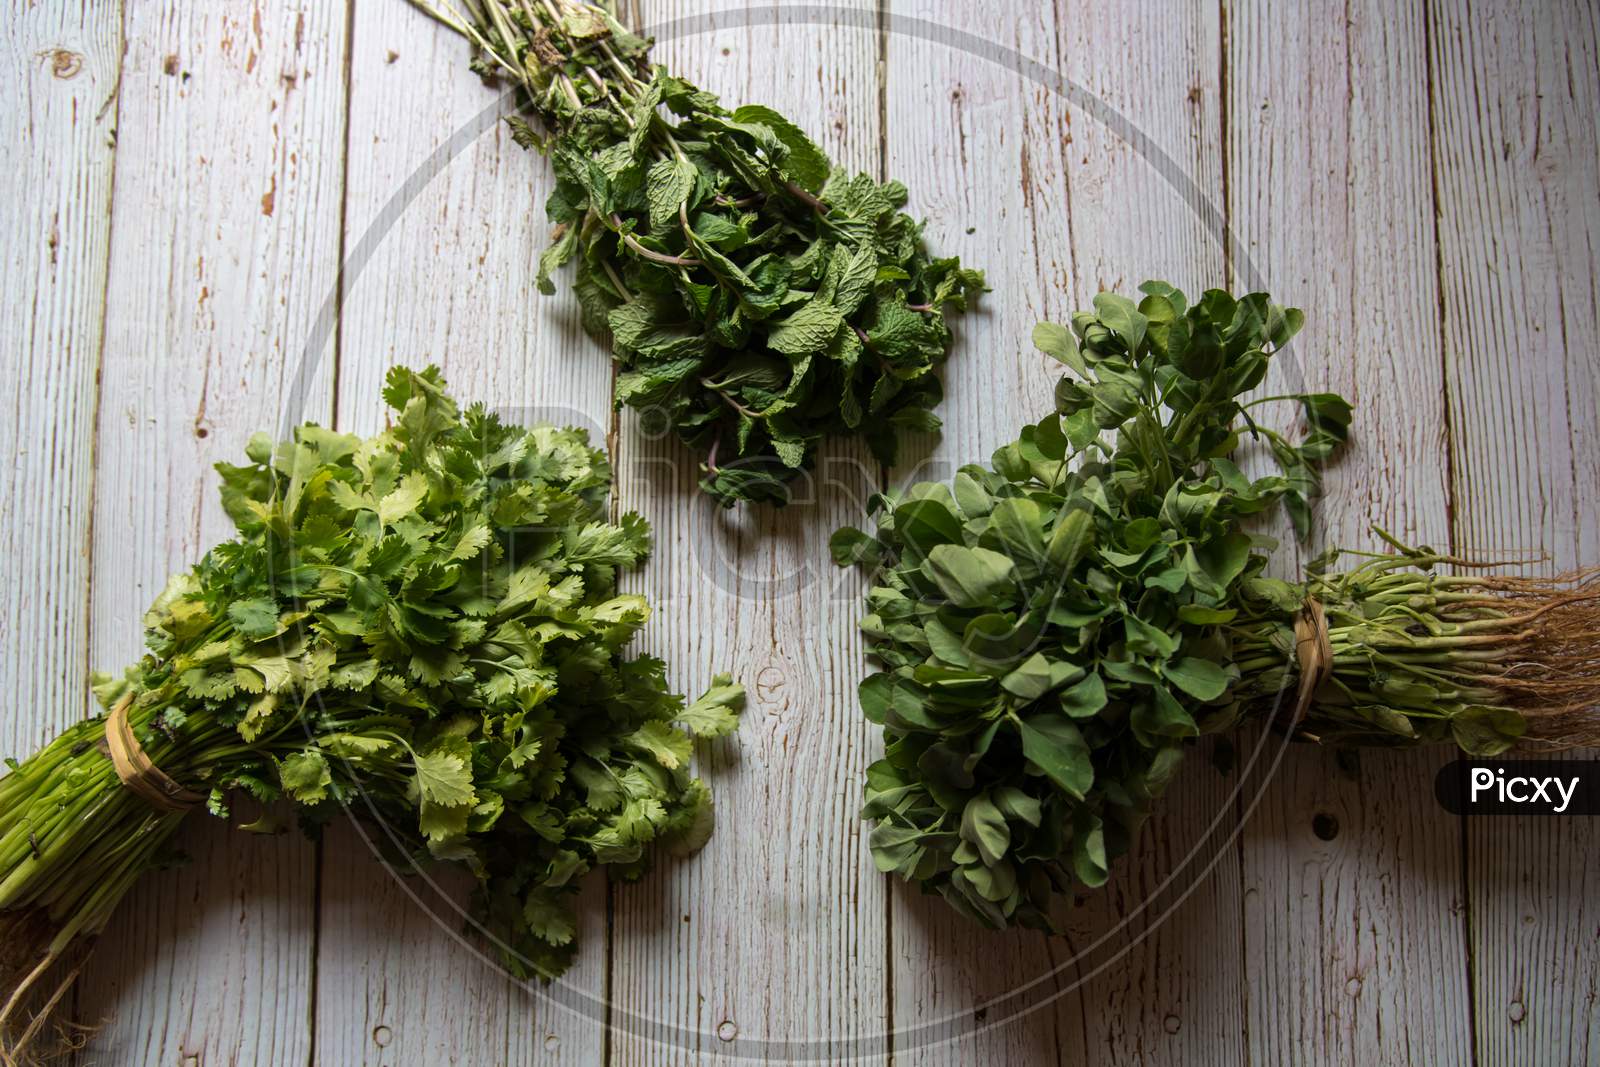 Top view of fresh aromatic herbs on wooden background.